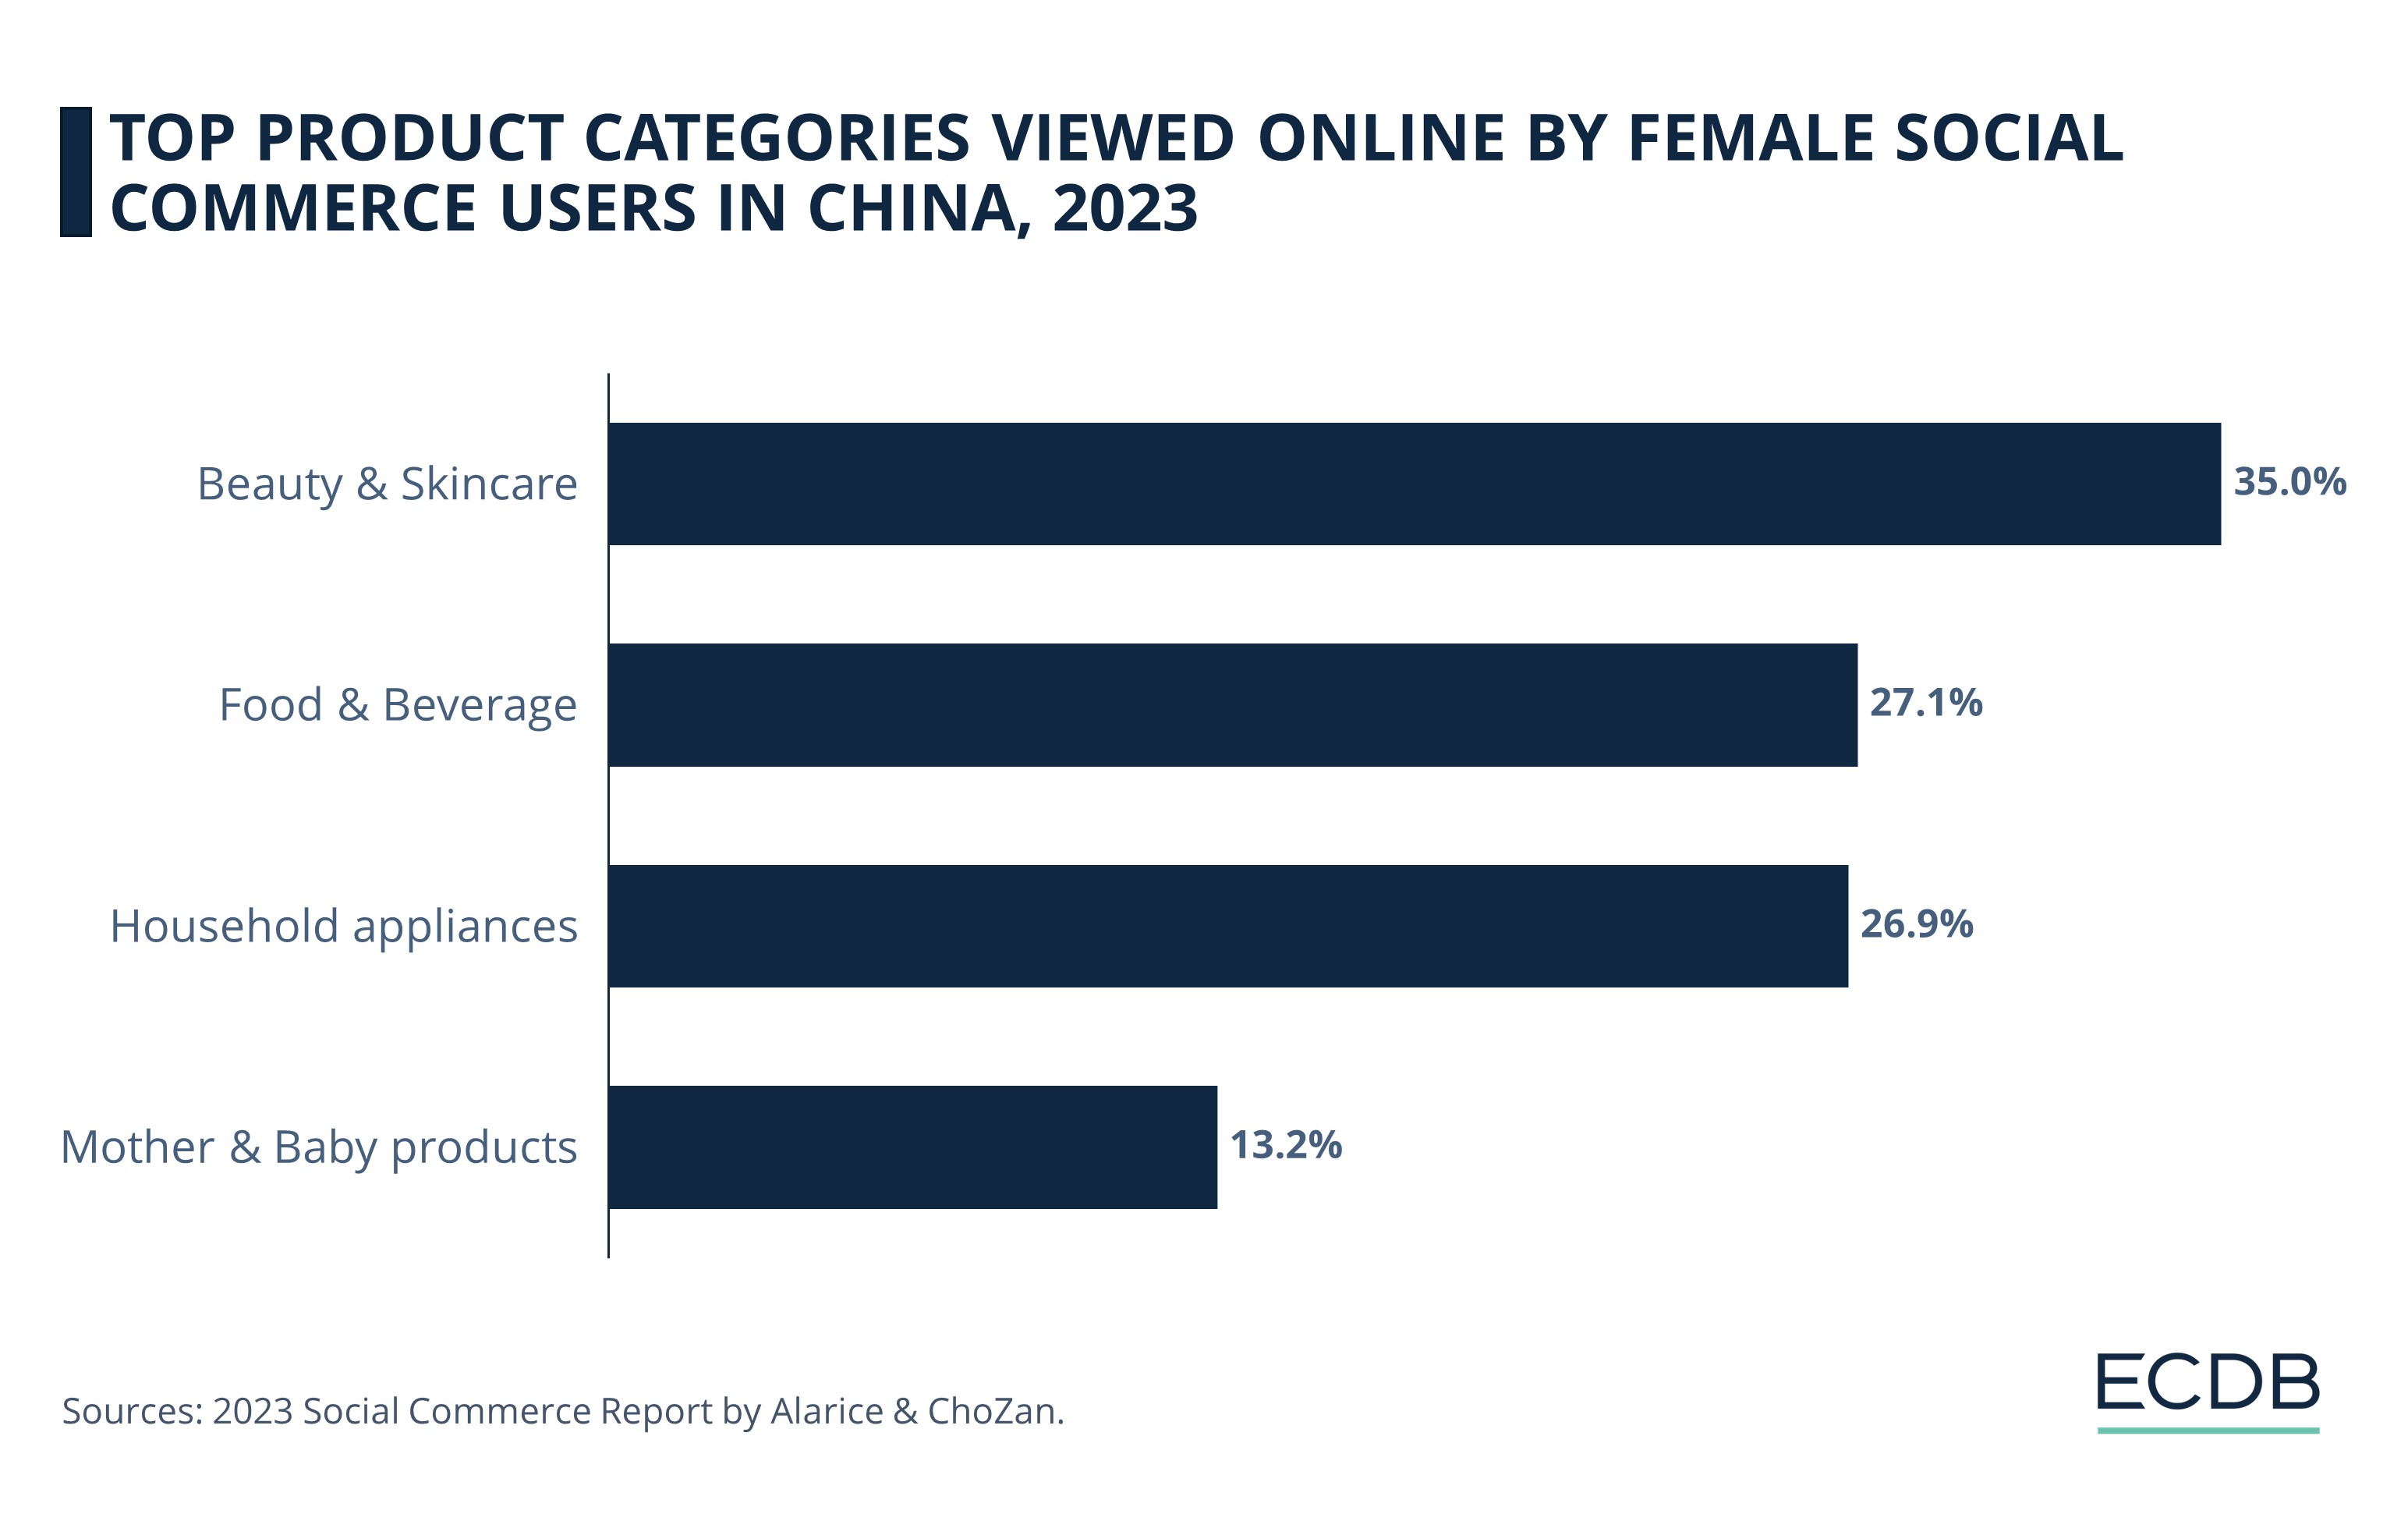 Top Product Categories of Female Social Commerce Users in China, 2023